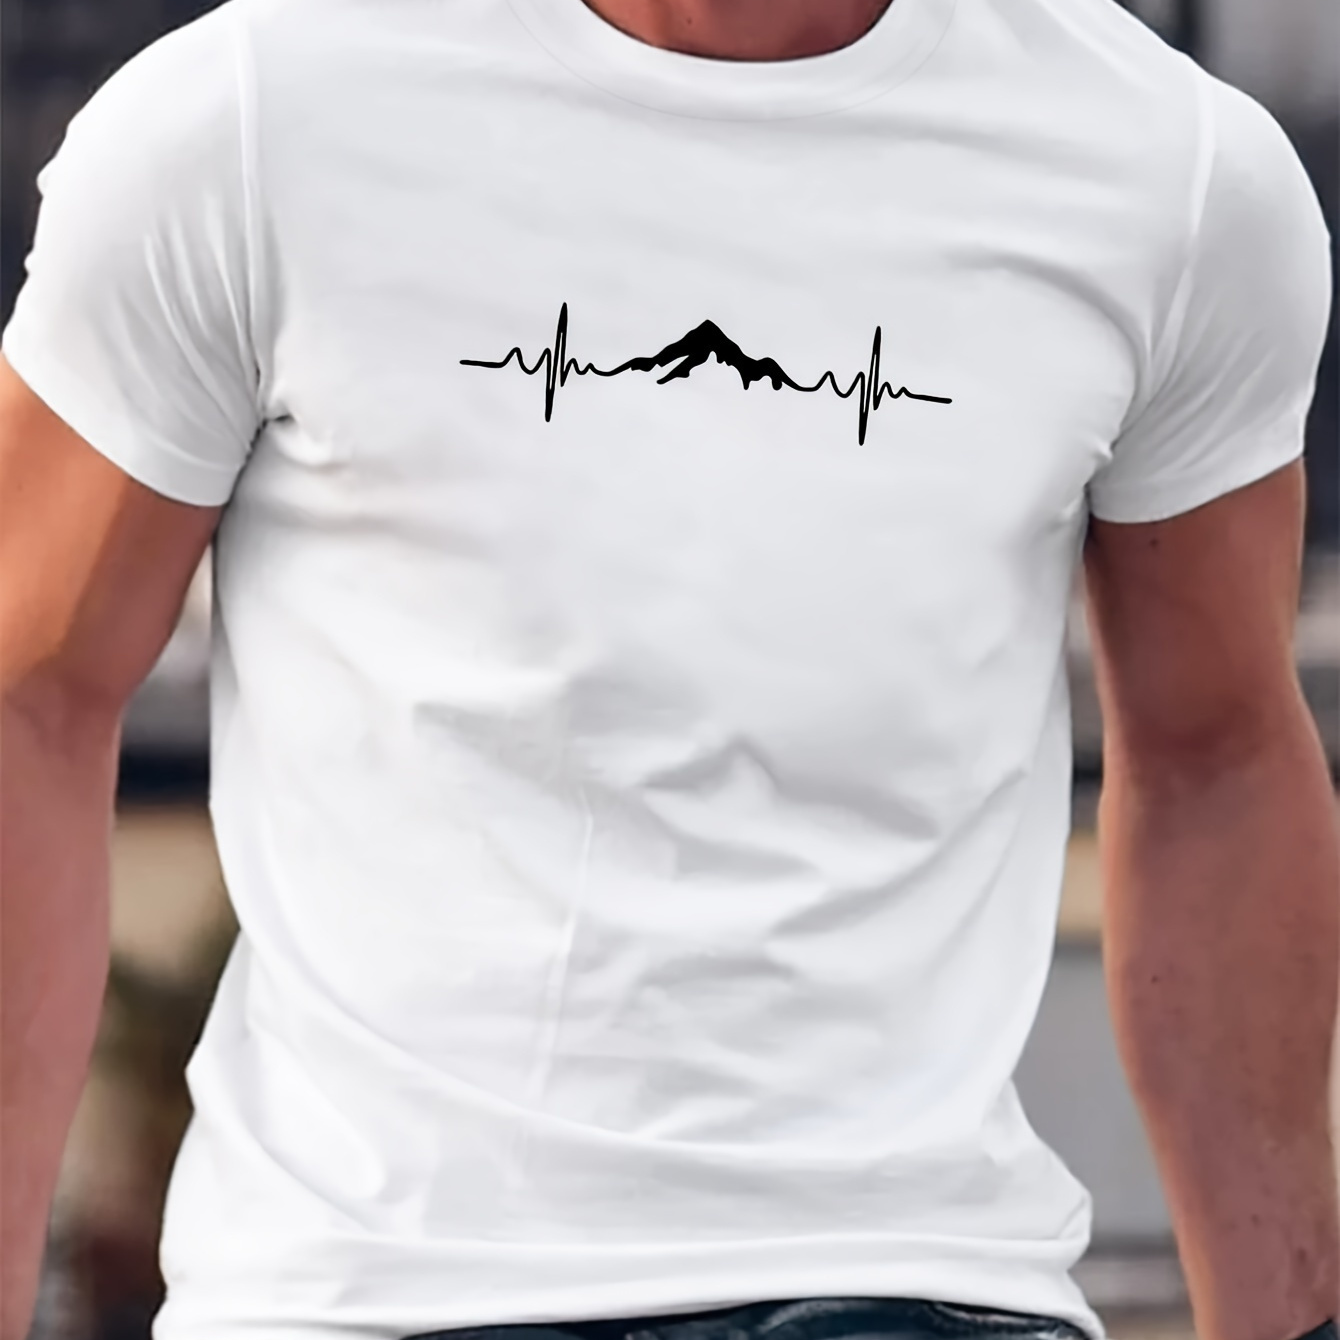 

Mountain Heartbeat Graphic Print Men's Creative Top, Casual Short Sleeve Crew Neck T-shirt, Men's Clothing For Summer Outdoor